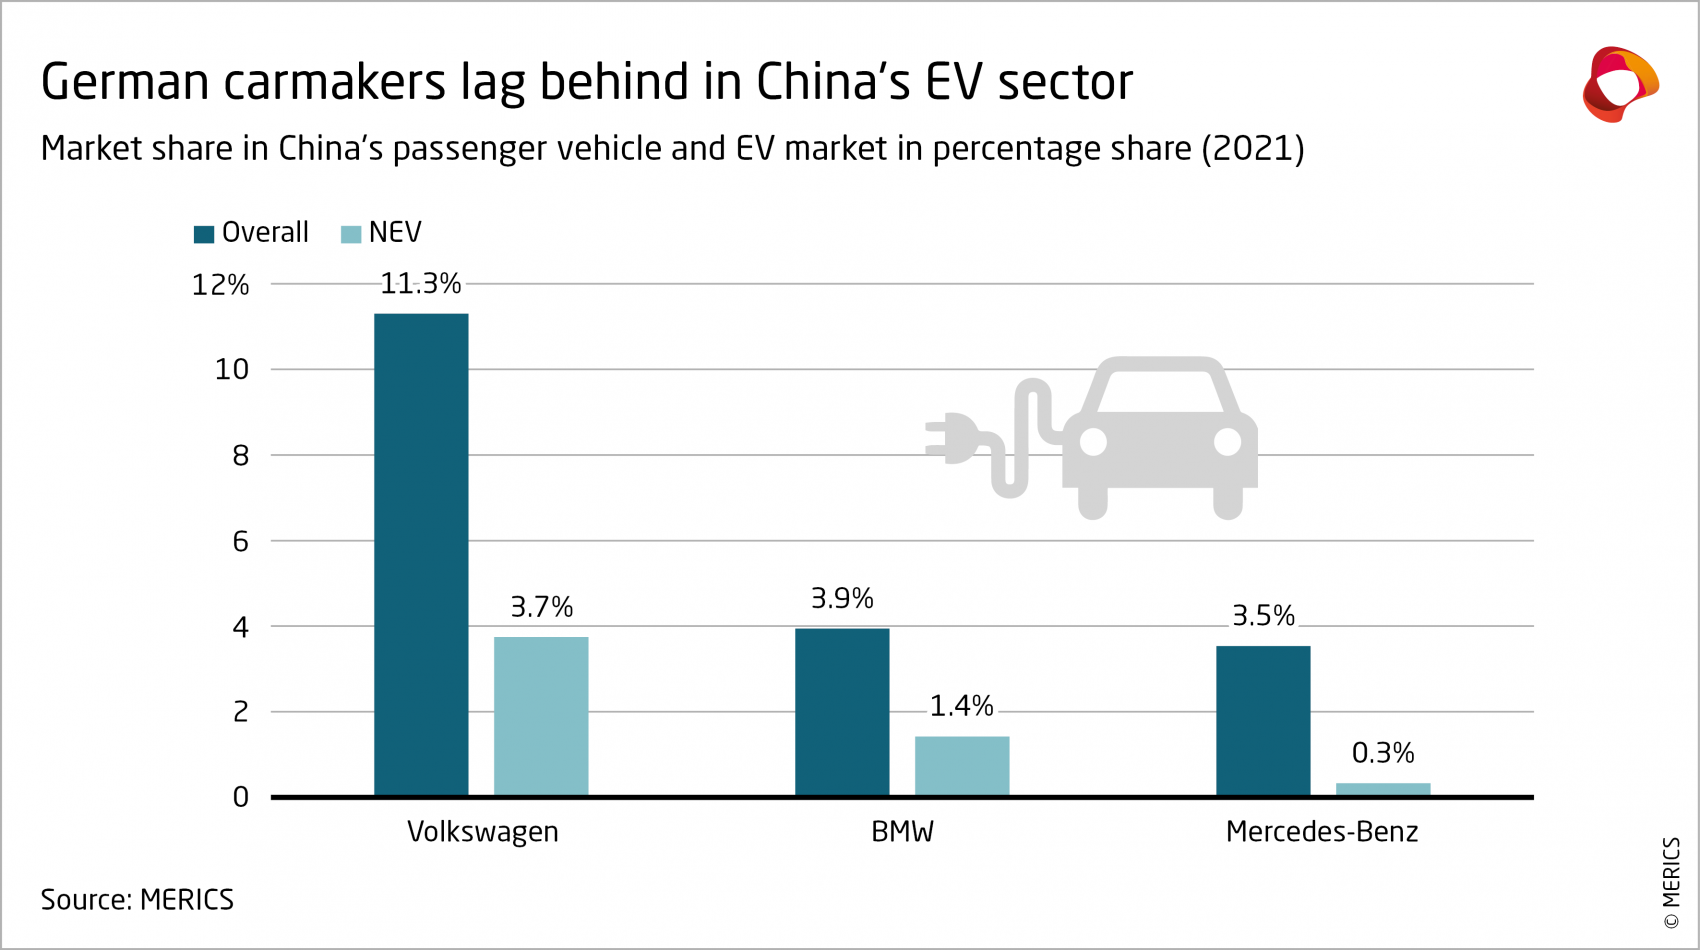 MERICS-Automotive-RD-in-China-German-carmakers-lag-behind-in-Chinas-EV-sector-Exhibit-4.png